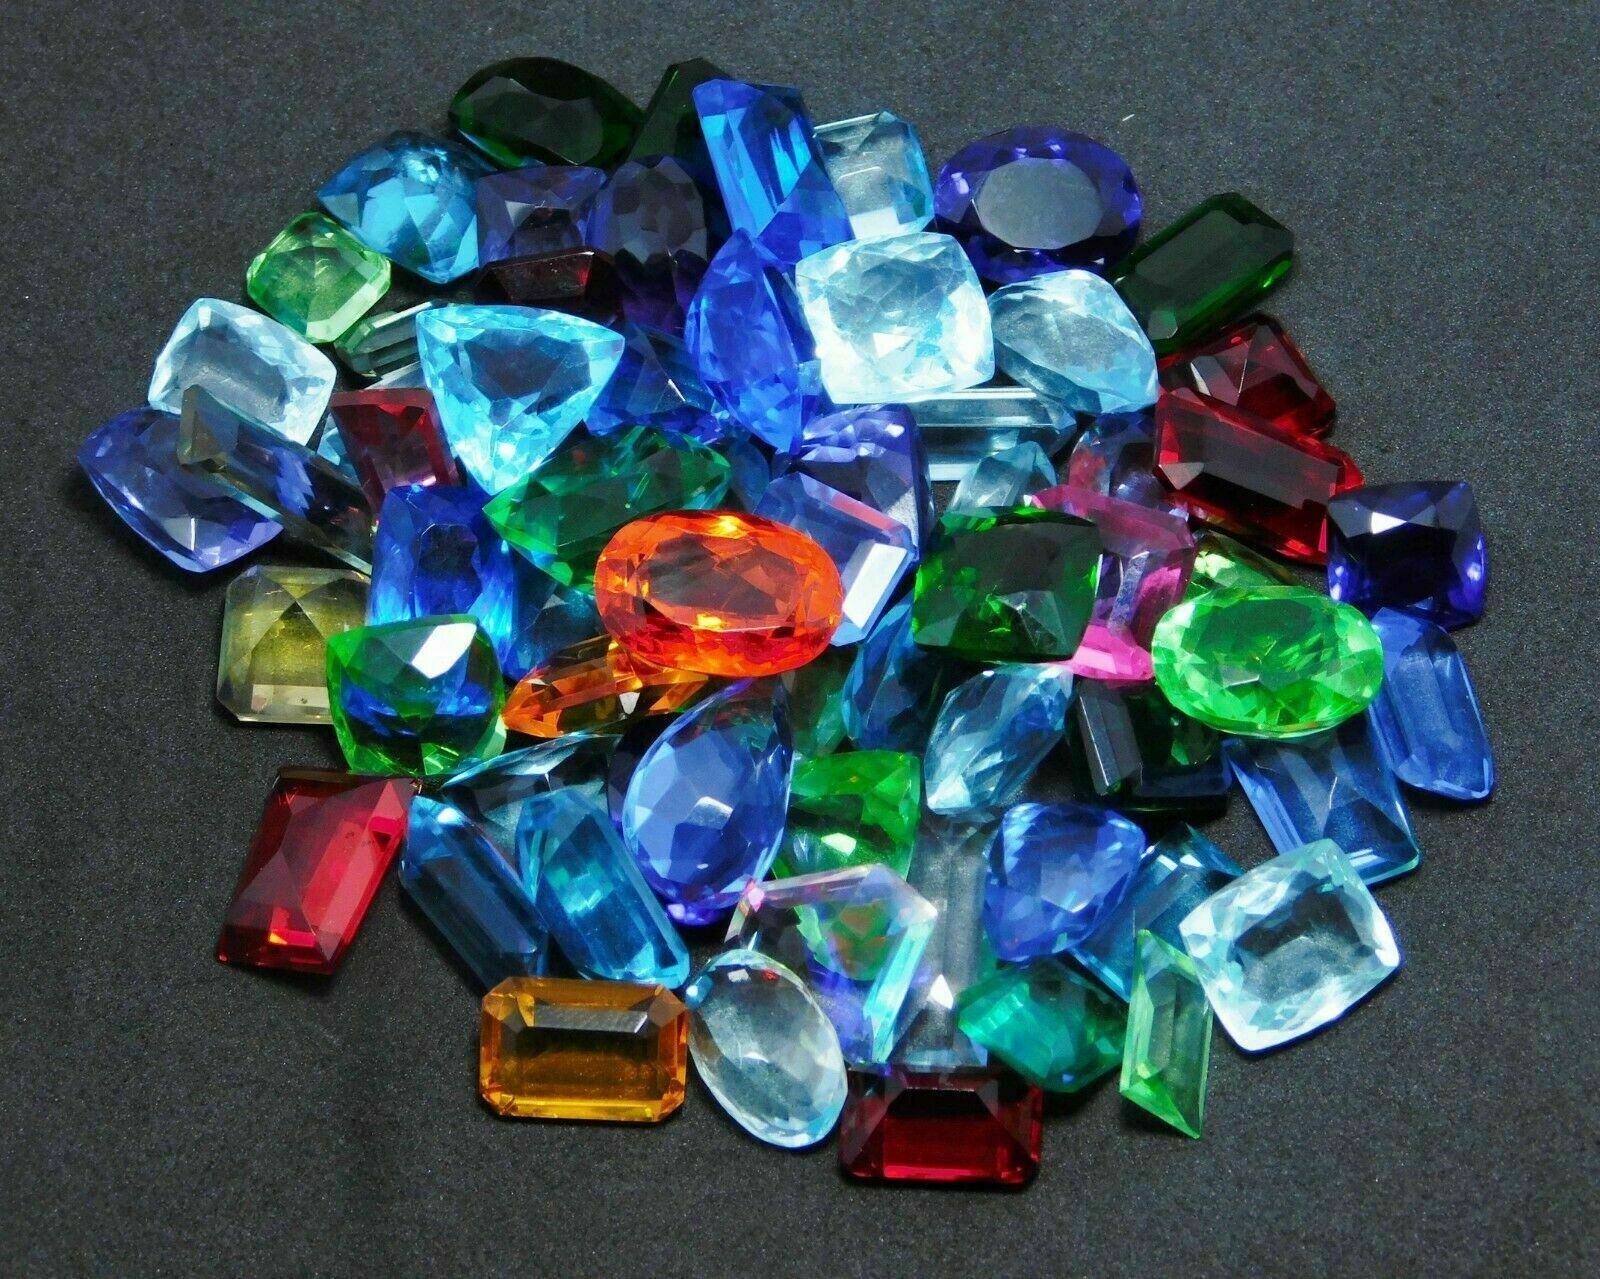 100 Cts Multi Color Mix Size /Cut Facet Topaz, Lab Created, Loose Gemstone Lot